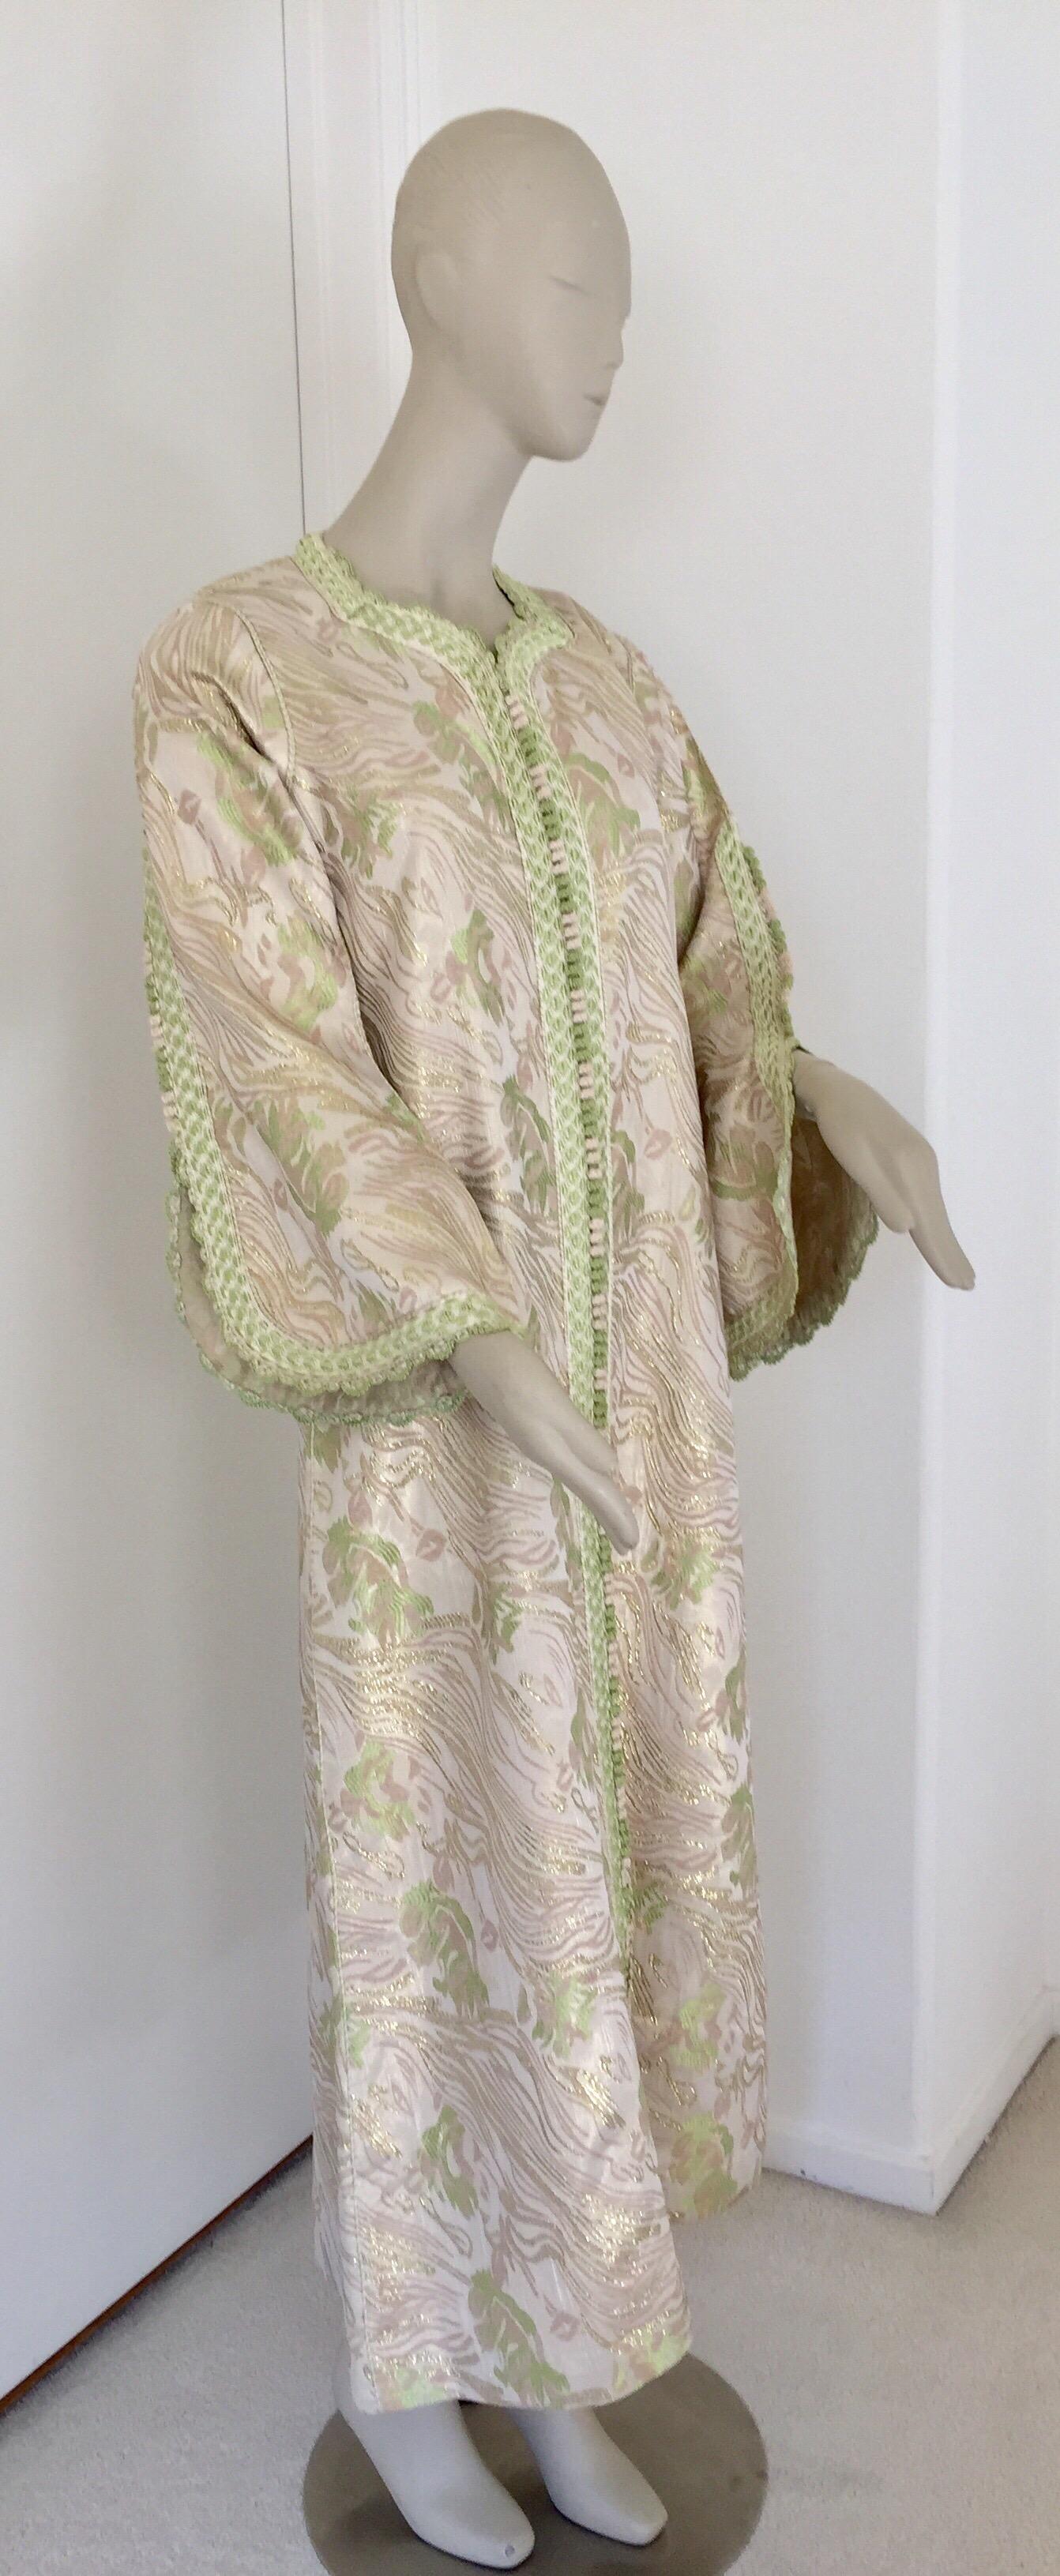 Elegant vintage Moroccan caftan lime green and silver lame metallic floral Moorish brocade Kaftan, circa 1970s.
This vintage long maxi dress kaftan is crafted in Morocco and tailored for a relaxed fit with wide sleeves
This long maxi dress kaftan is